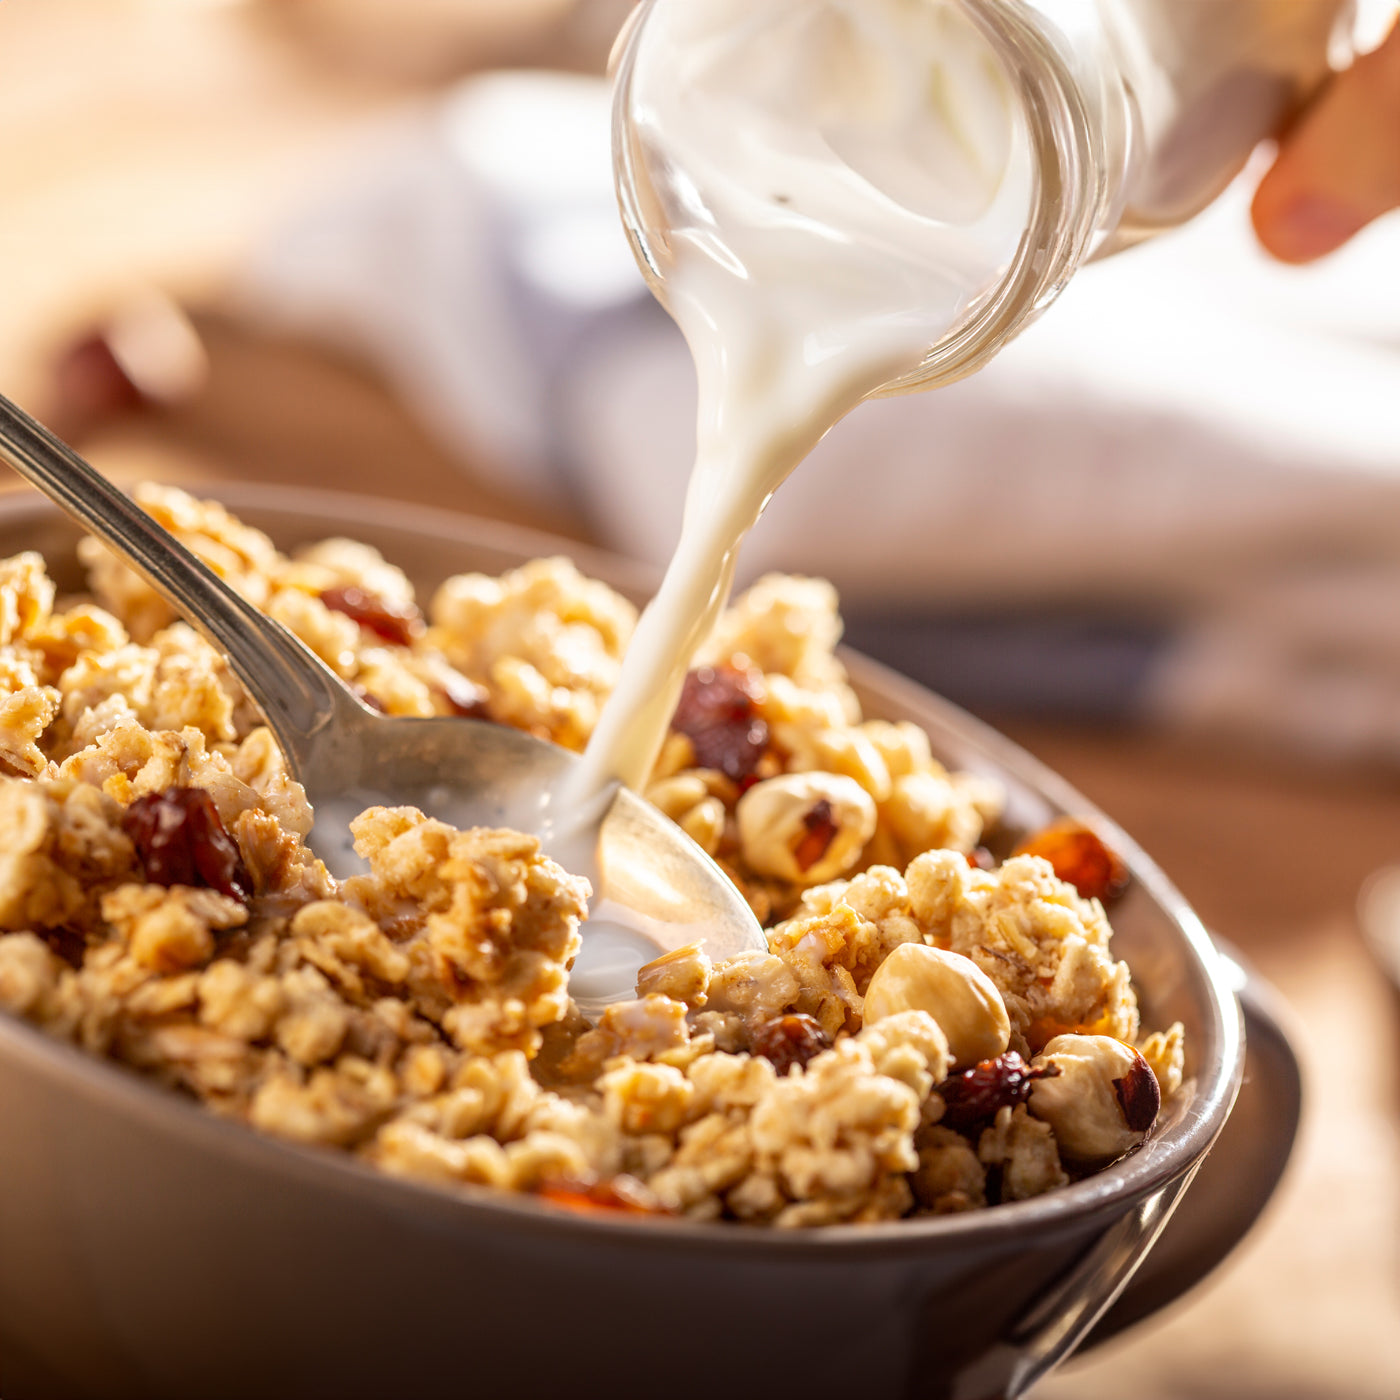 Milk being poured over a bowl of generic granola